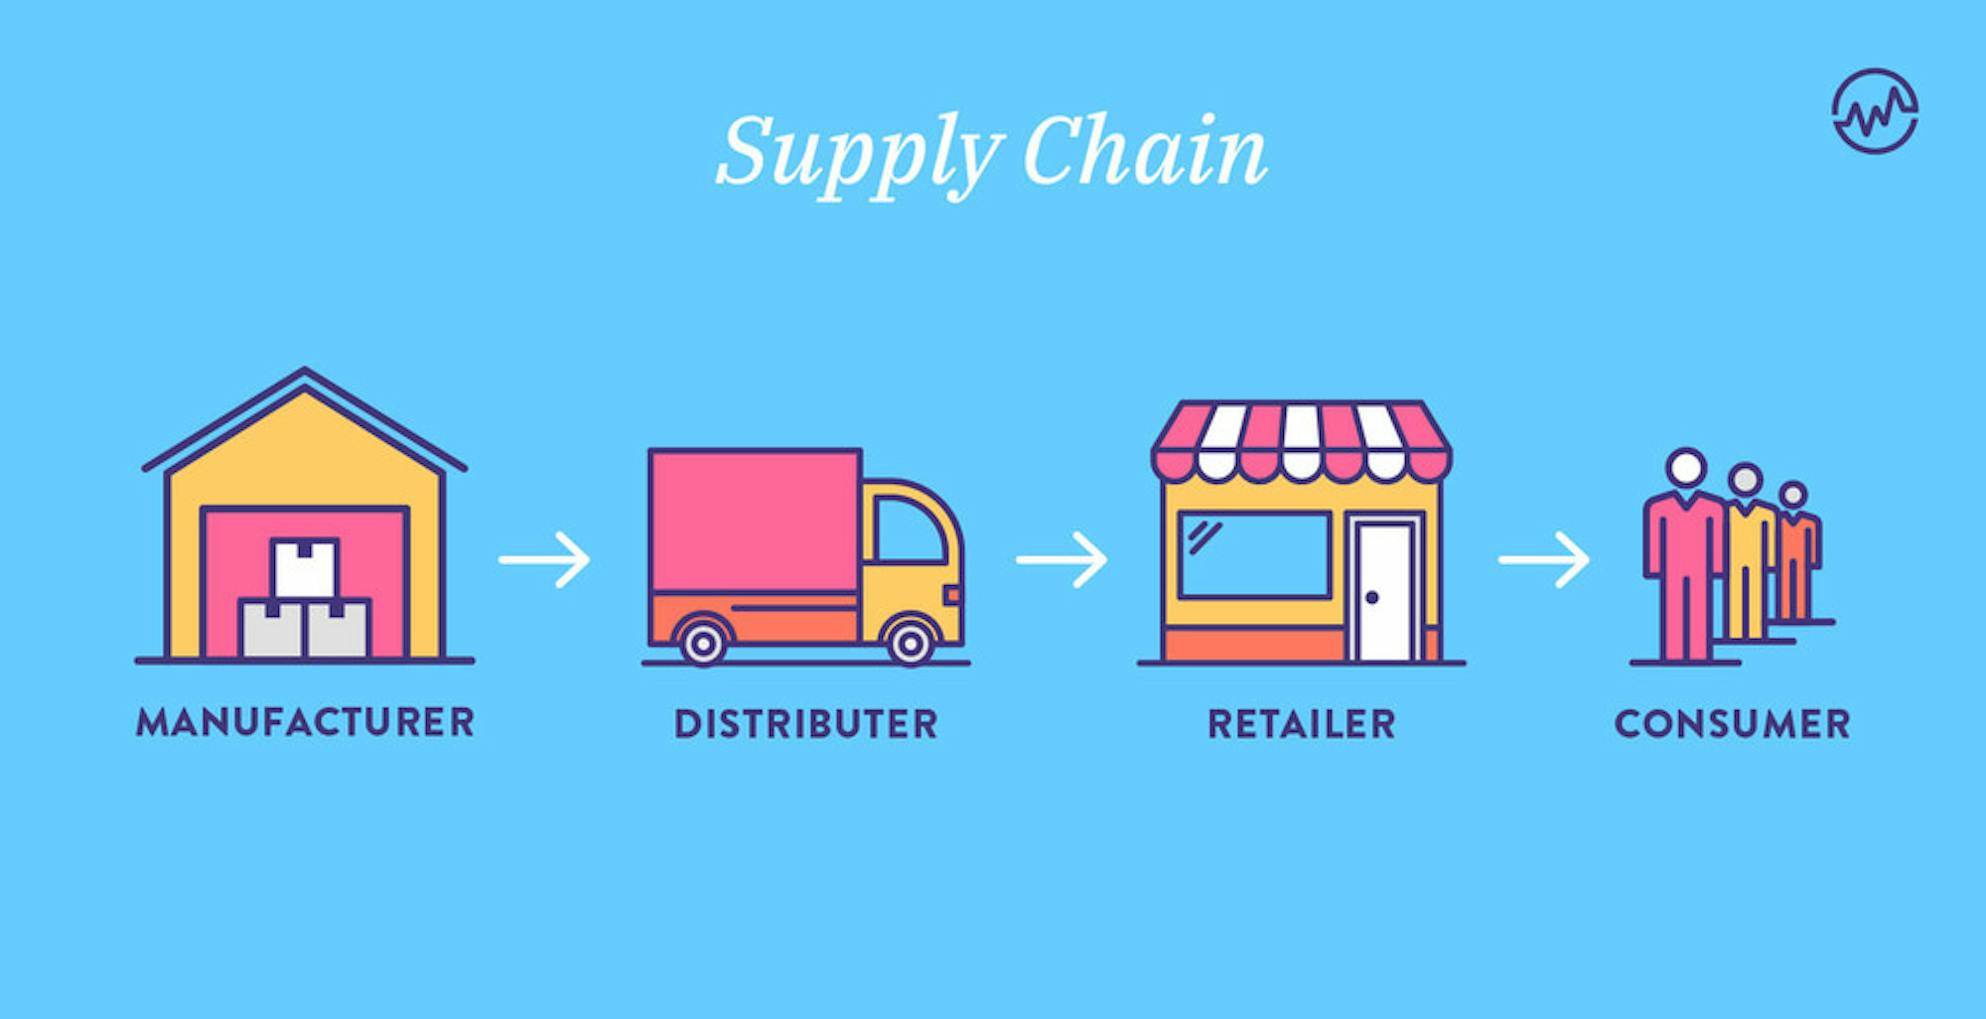 Supply chain graphic showing a manufacturer, distributor, retailer and consumer